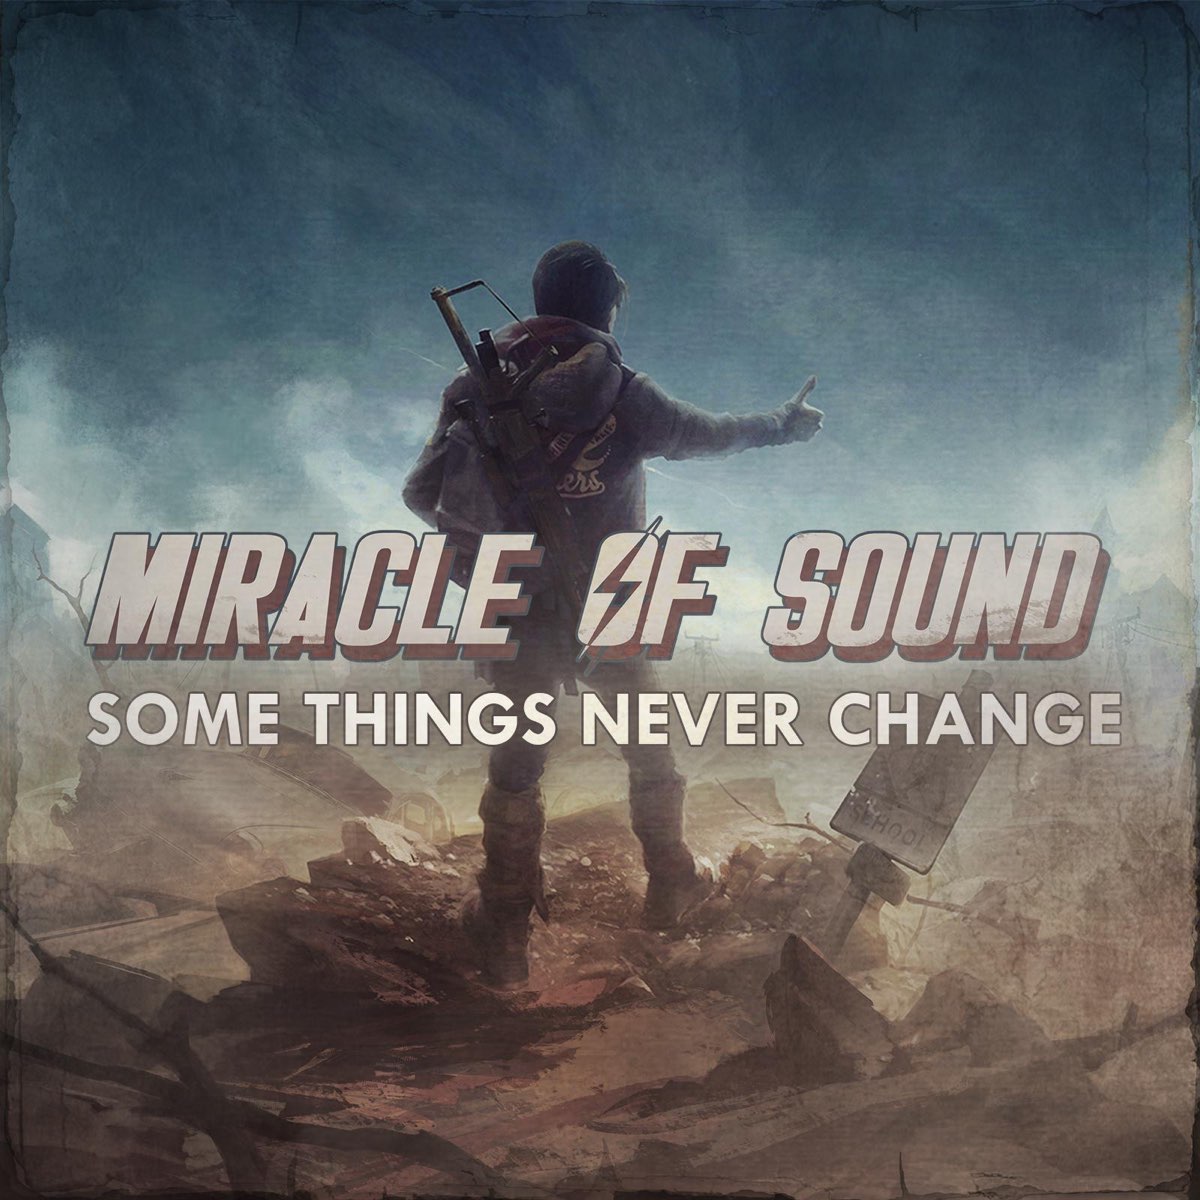 Fallout 4 song some things never change by miracle of sound фото 1